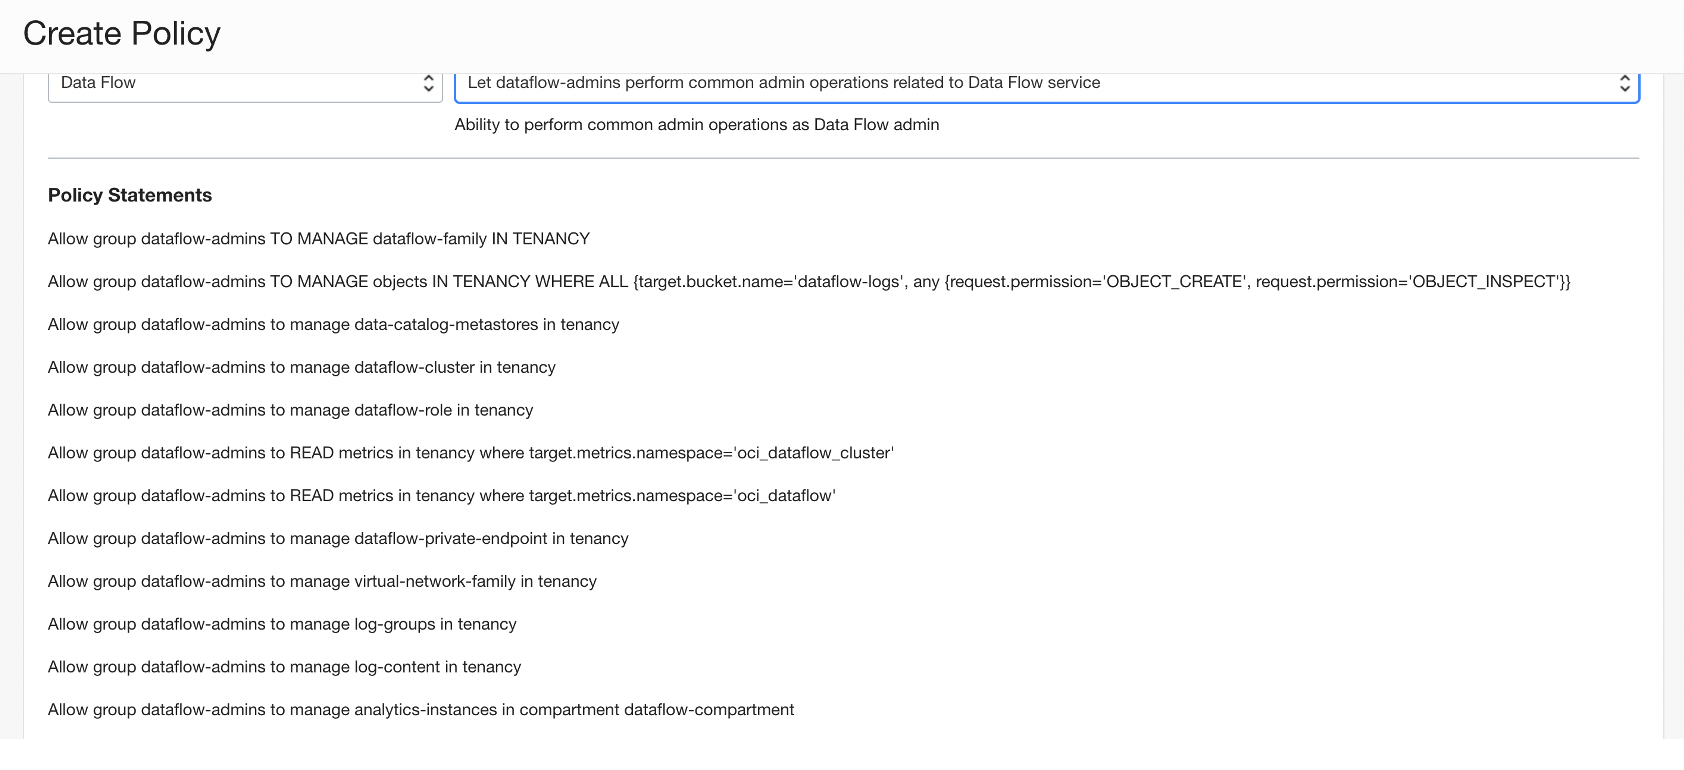 The policy Let dataflow-admins perform common admin operations related to Data Flow service is selected, and the policy statements for it are displayed.